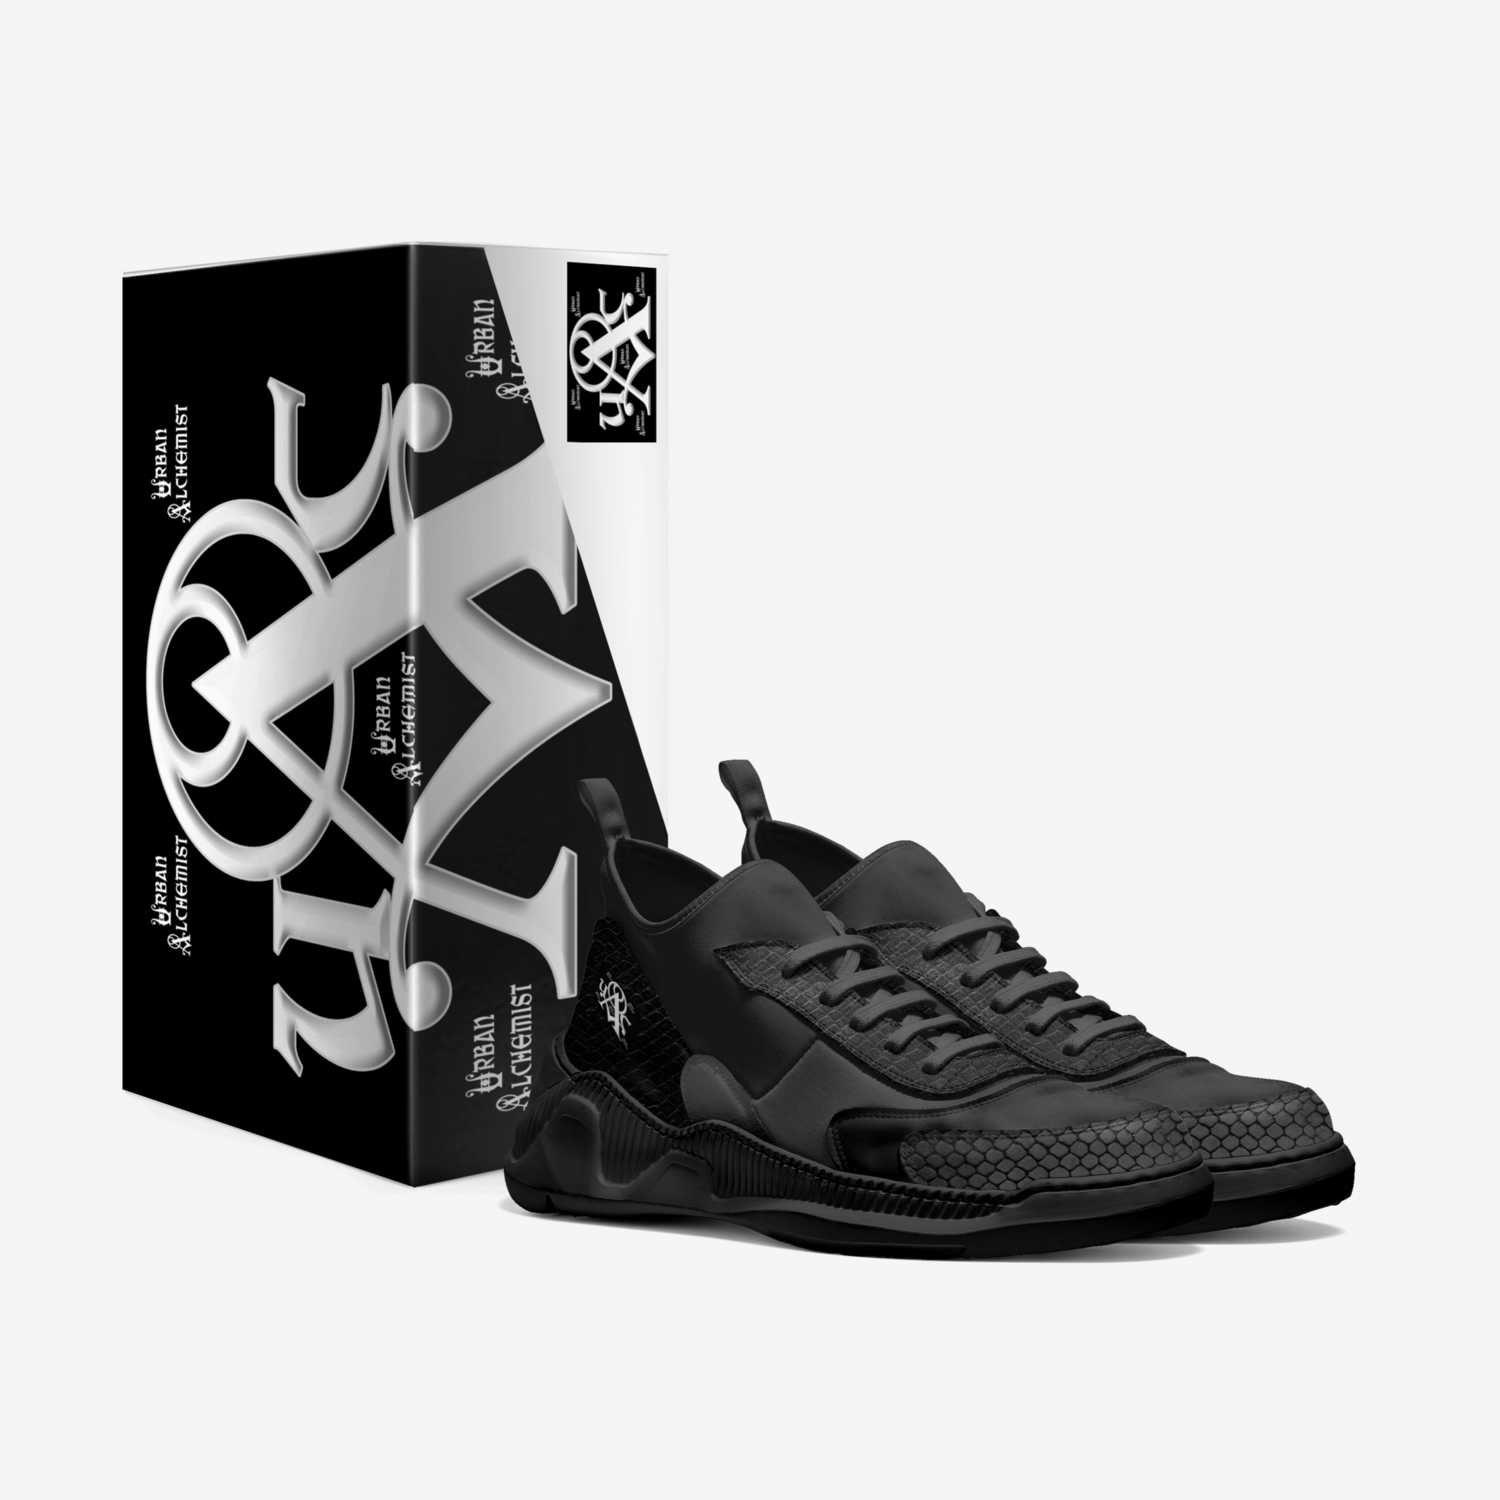 Black Thoughts custom made in Italy shoes by Urban Alchemist Clothing | Box view